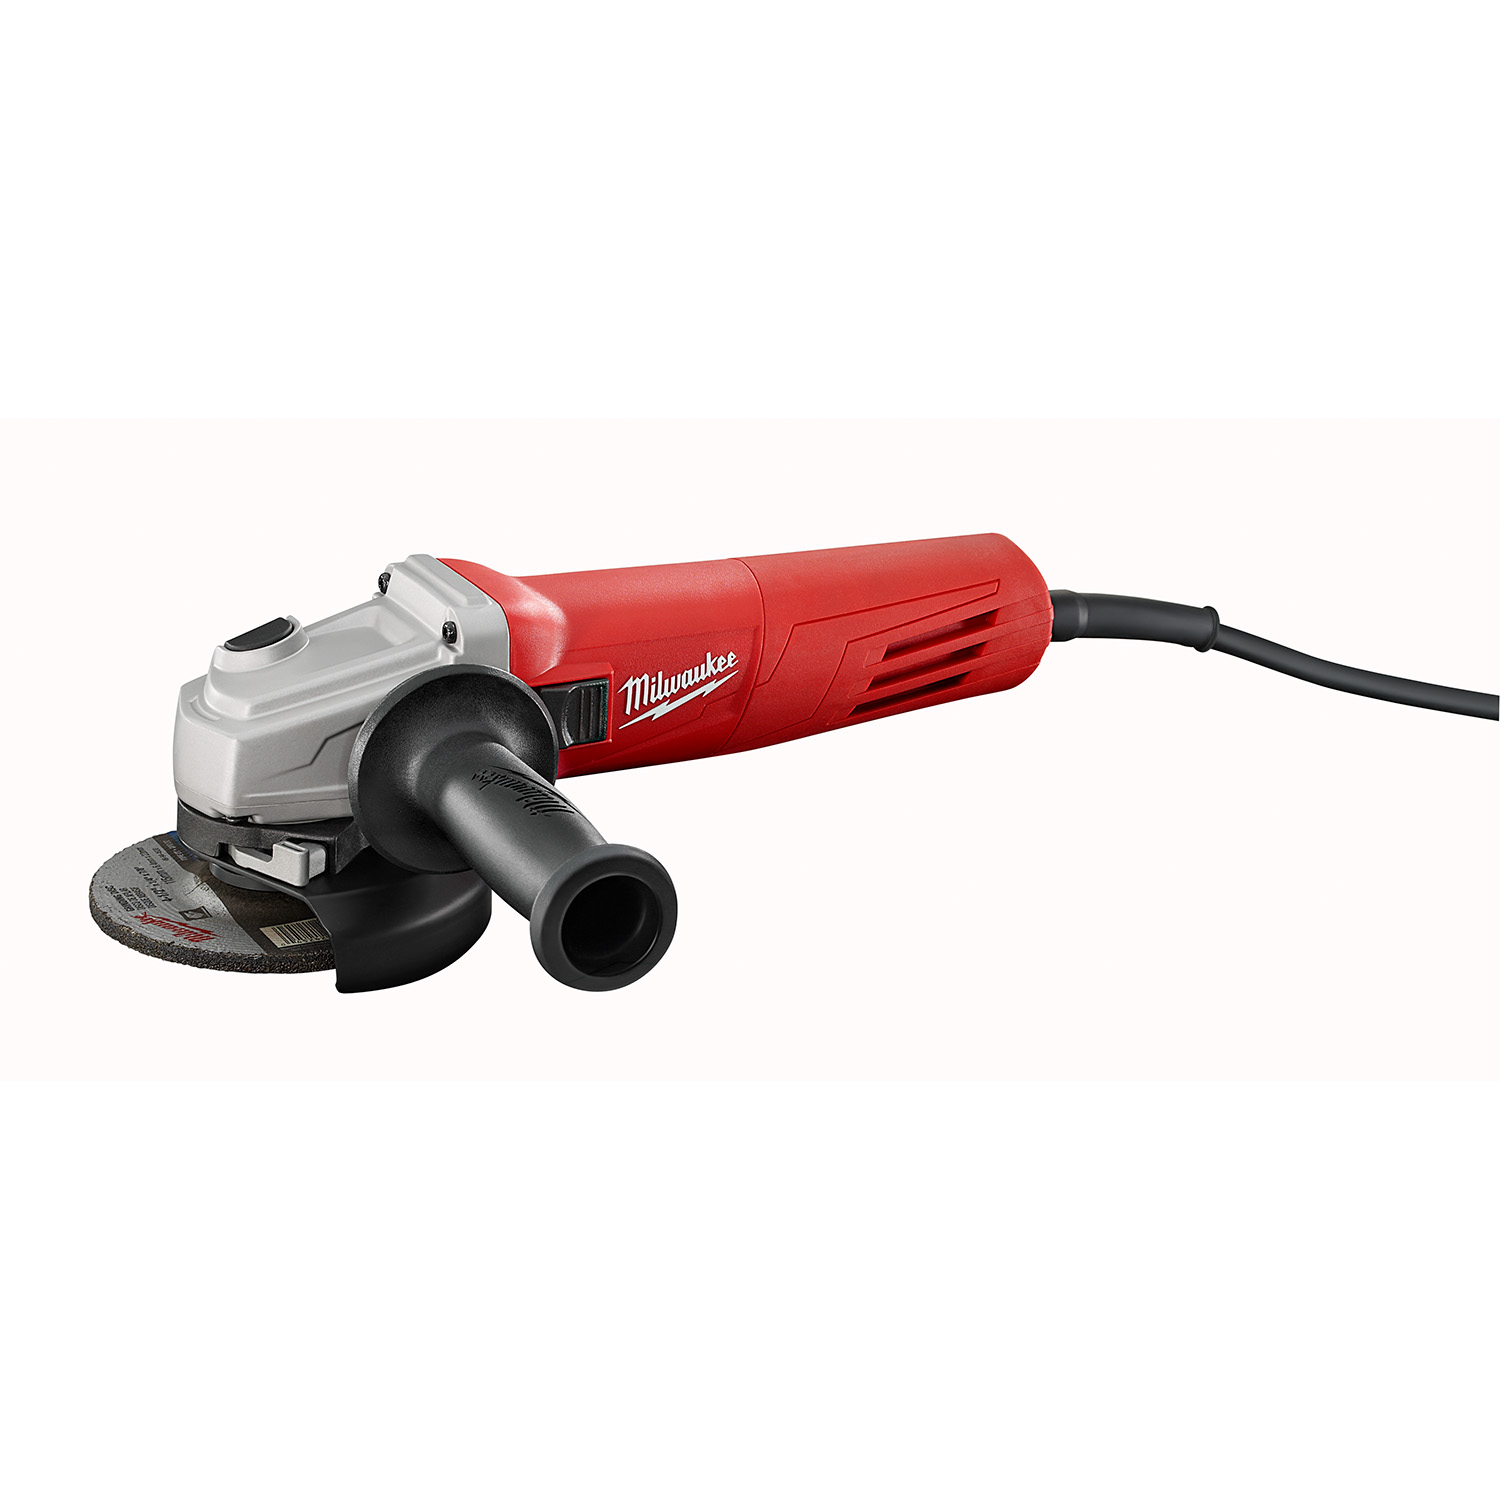 Milwaukee 11 Amp 4-1/2 Inch Small Angle Grinder with Slide Lock-On Switch from Columbia Safety